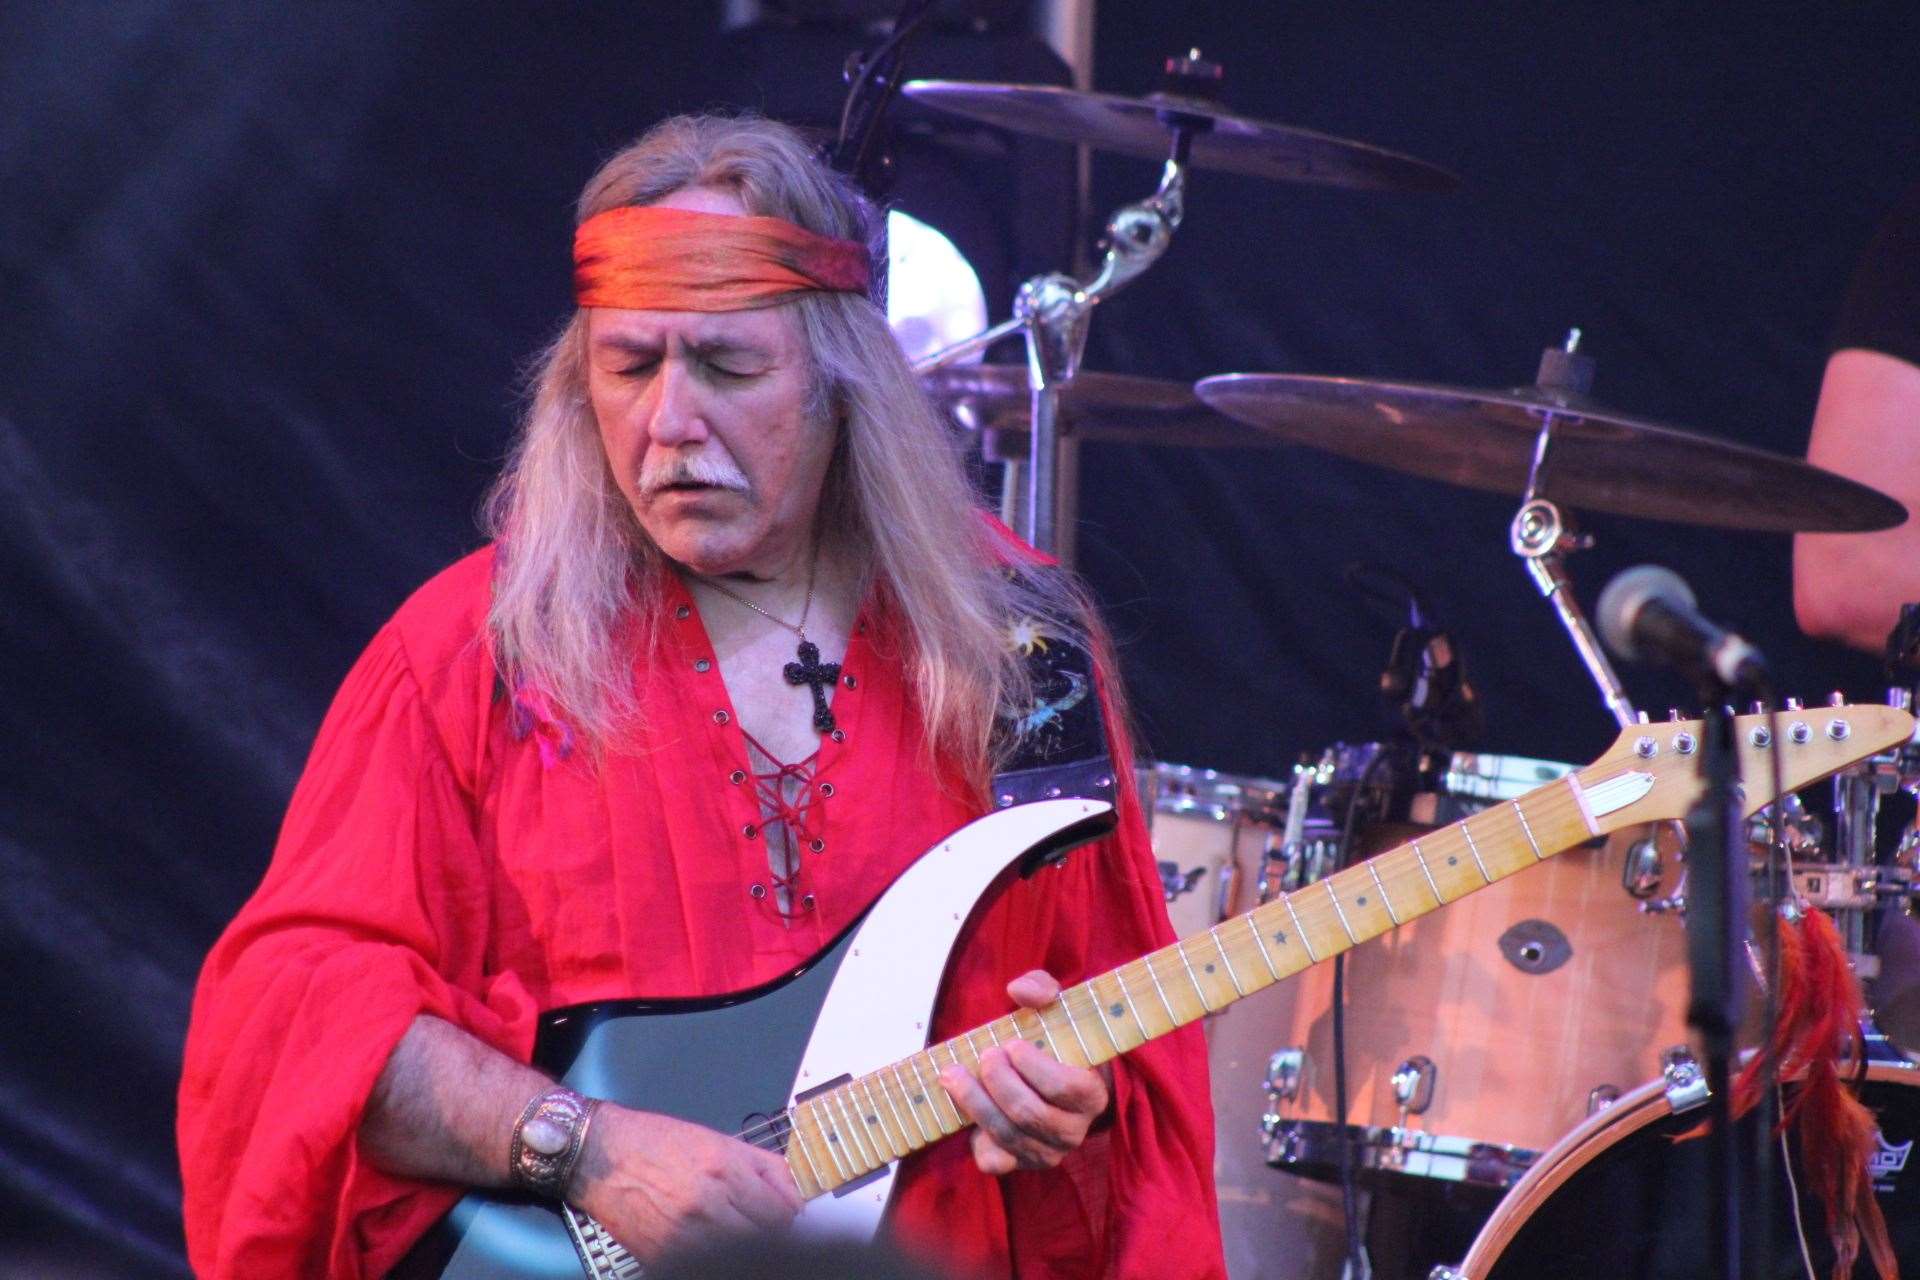 Uli Jon Roth from German rock band The Scorpions at A New Day Festival at Mount Ephraim Gardens, Hernhill, Faversham (14861869)